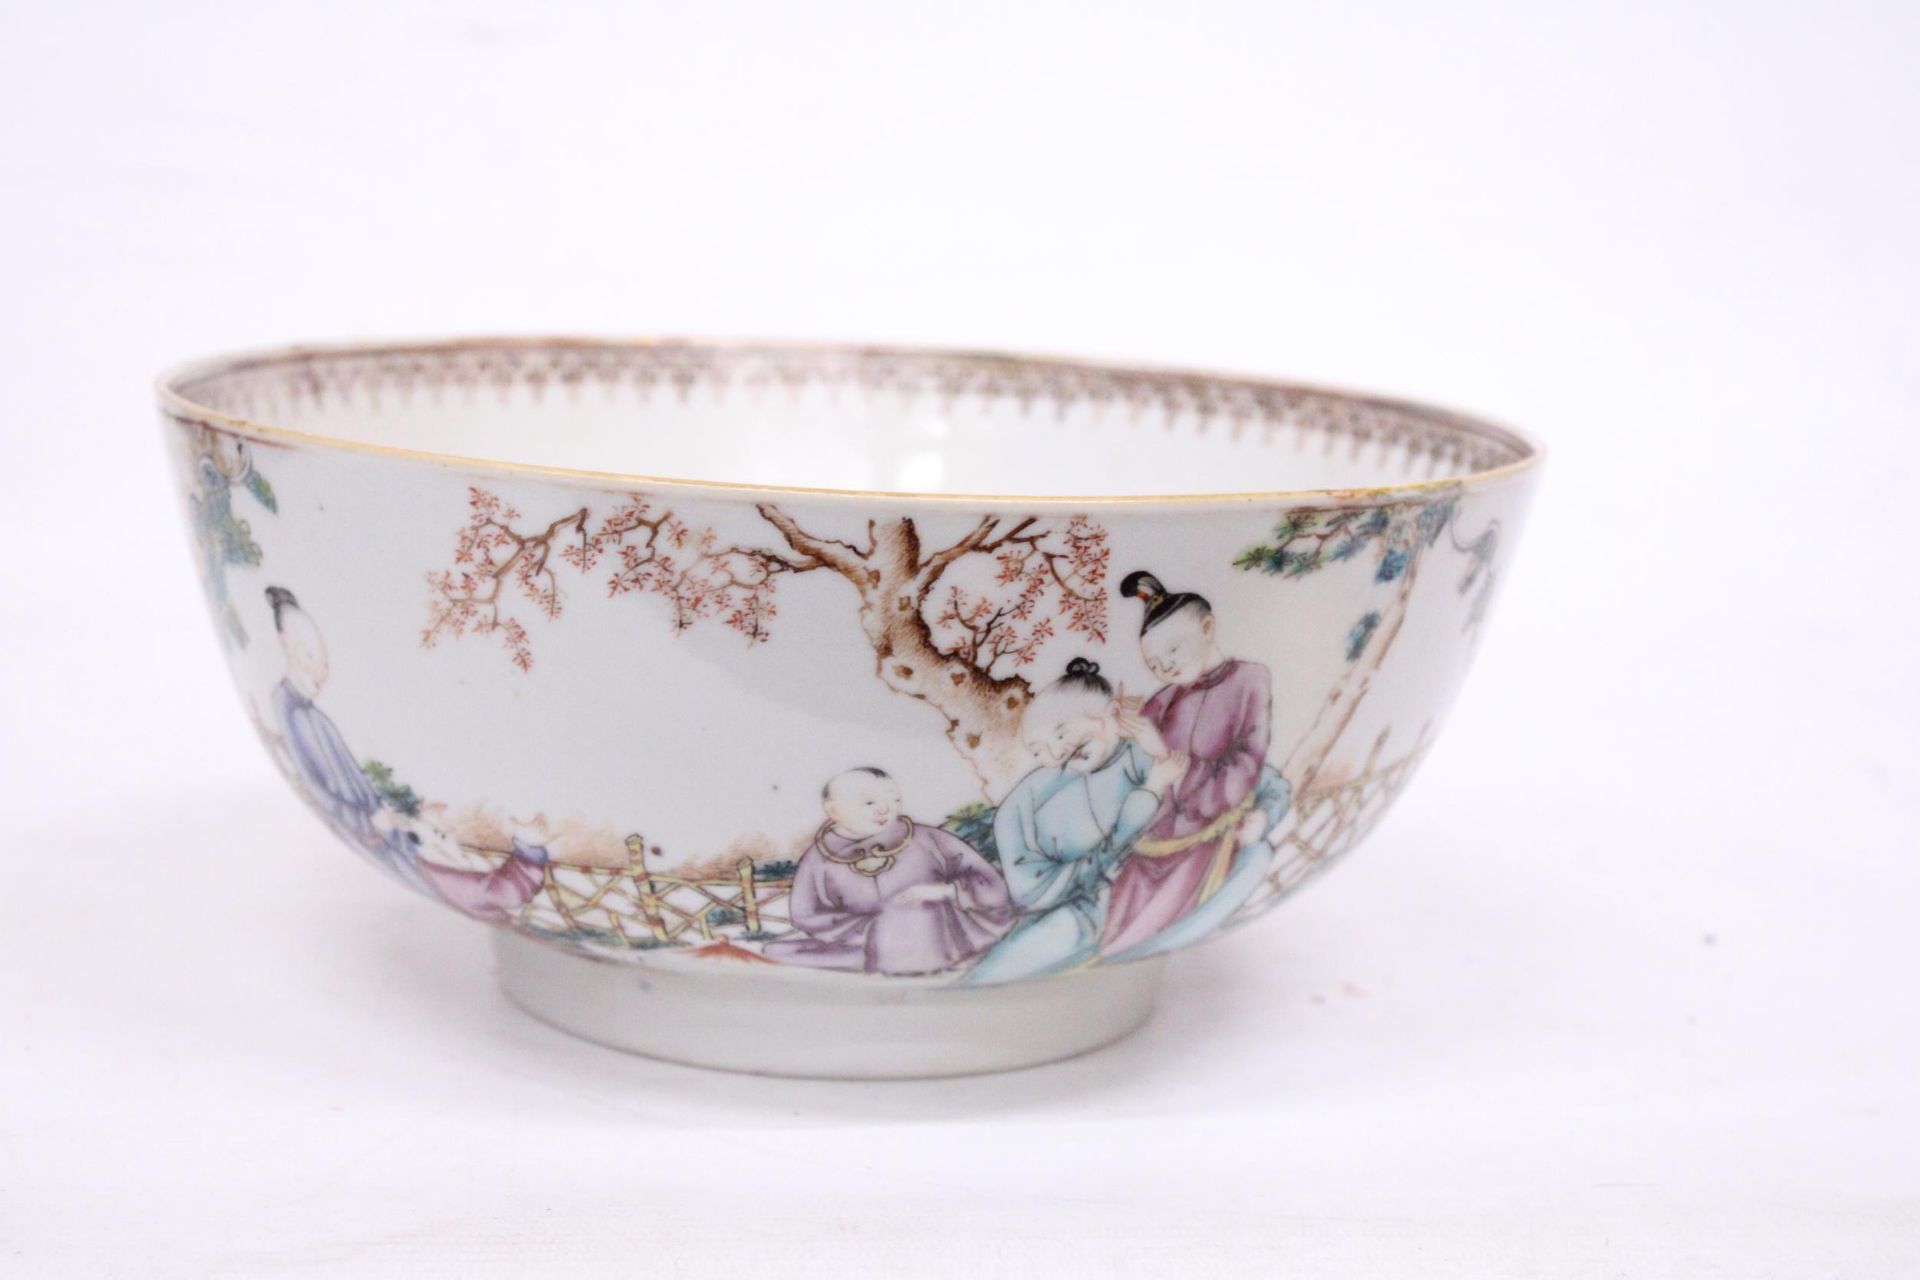 A CHINESE EXPORT FIGURAL DESIGN FOOTED BOWL - 11 CM (H) - 25.5 (D) - Image 3 of 7